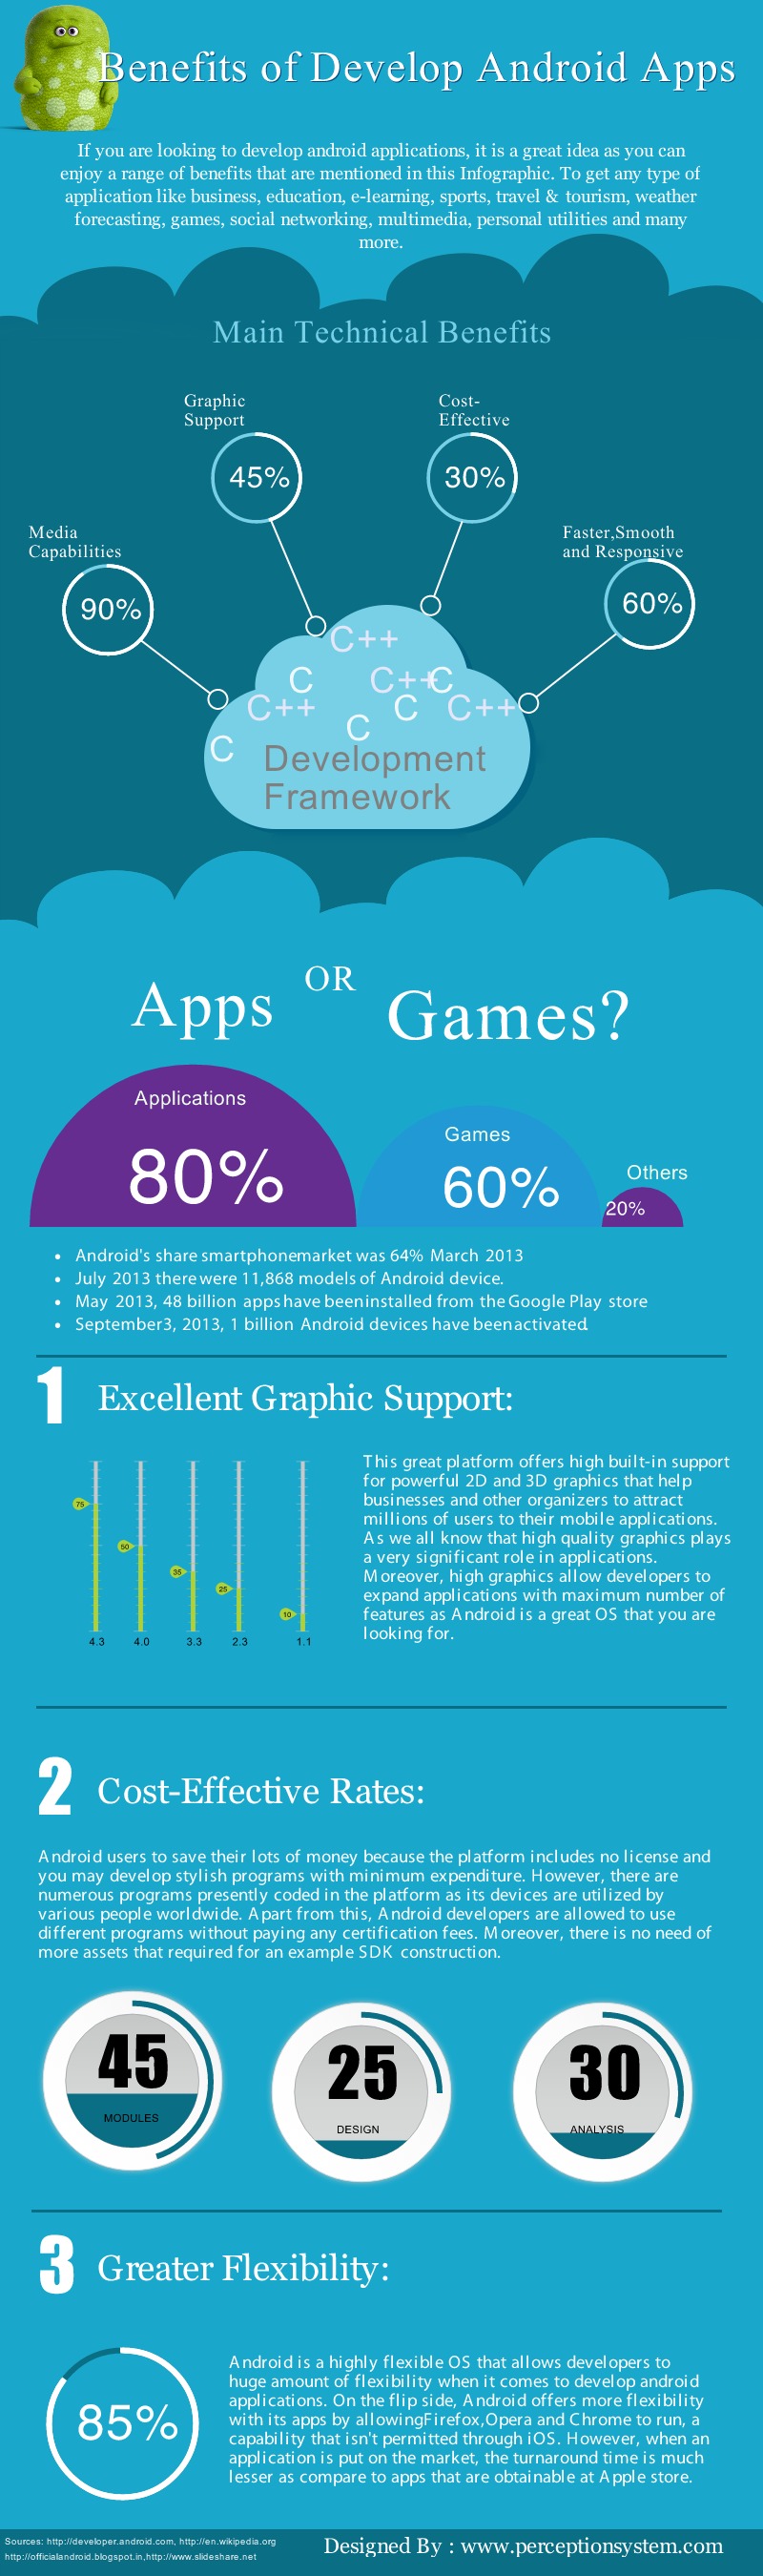 Benefits In Developing Android Apps | Infographics | Graphs.net